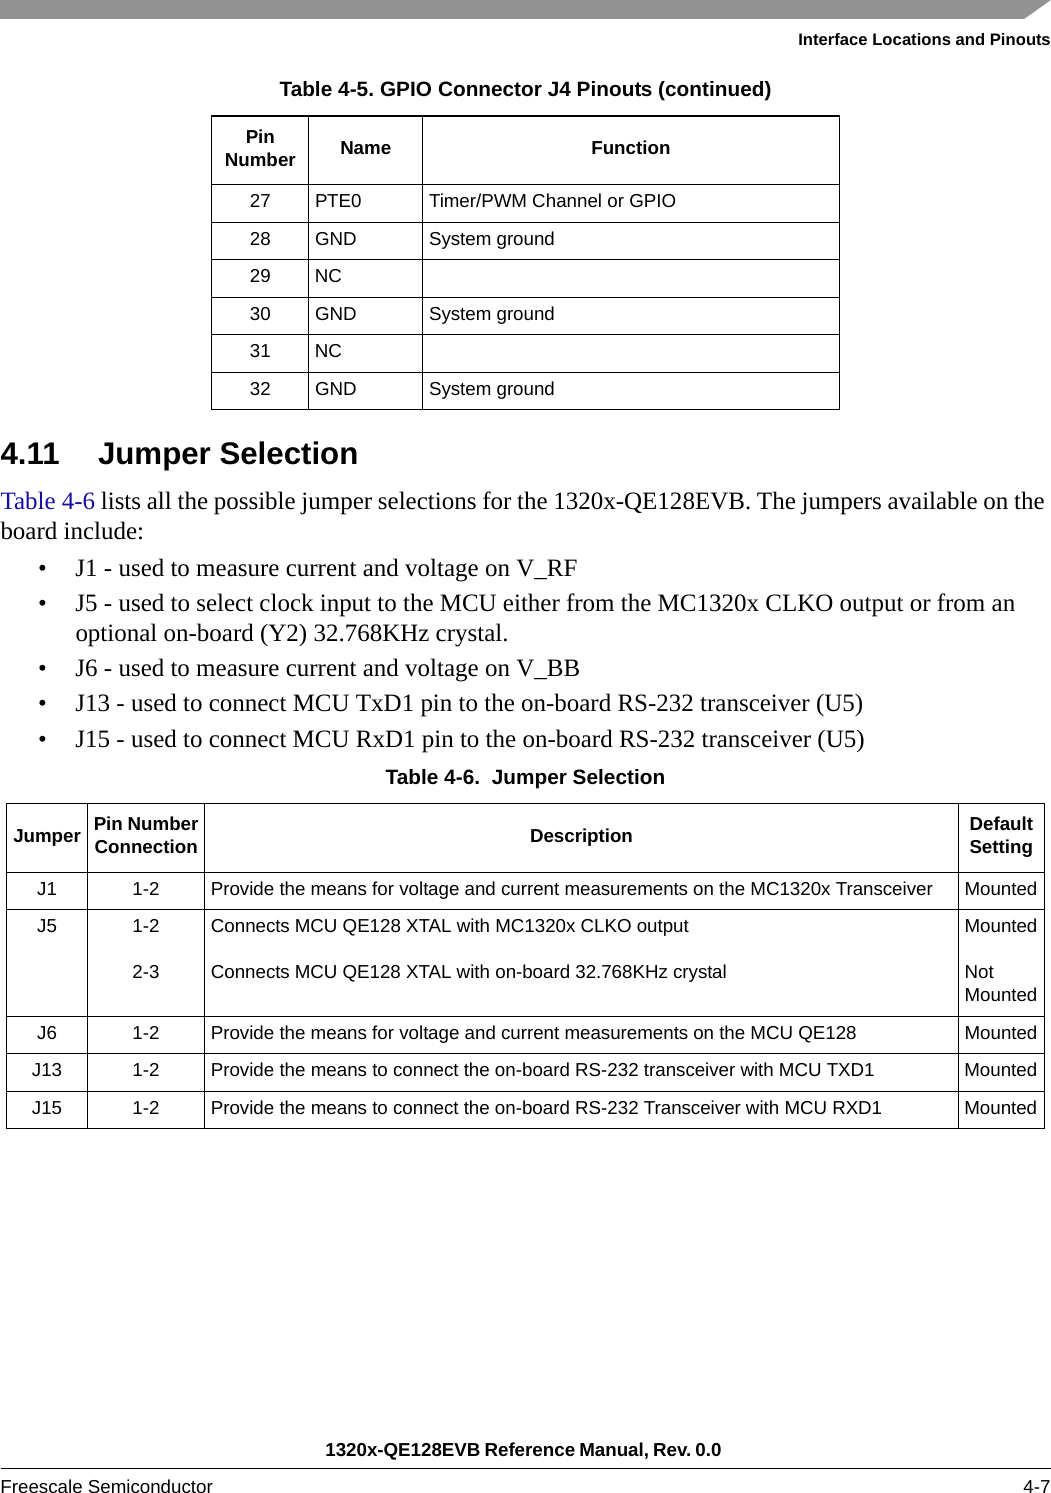 Interface Locations and Pinouts1320x-QE128EVB Reference Manual, Rev. 0.0 Freescale Semiconductor 4-74.11 Jumper SelectionTable 4-6 lists all the possible jumper selections for the 1320x-QE128EVB. The jumpers available on the board include:• J1 - used to measure current and voltage on V_RF• J5 - used to select clock input to the MCU either from the MC1320x CLKO output or from an optional on-board (Y2) 32.768KHz crystal.• J6 - used to measure current and voltage on V_BB• J13 - used to connect MCU TxD1 pin to the on-board RS-232 transceiver (U5)• J15 - used to connect MCU RxD1 pin to the on-board RS-232 transceiver (U5)27 PTE0 Timer/PWM Channel or GPIO28 GND System ground29 NC30 GND System ground31 NC32 GND System groundTable 4-6.  Jumper SelectionJumper Pin NumberConnection Description Default SettingJ1 1-2 Provide the means for voltage and current measurements on the MC1320x Transceiver MountedJ5 1-22-3Connects MCU QE128 XTAL with MC1320x CLKO outputConnects MCU QE128 XTAL with on-board 32.768KHz crystalMountedNot MountedJ6 1-2 Provide the means for voltage and current measurements on the MCU QE128 MountedJ13 1-2 Provide the means to connect the on-board RS-232 transceiver with MCU TXD1 MountedJ15 1-2 Provide the means to connect the on-board RS-232 Transceiver with MCU RXD1 MountedTable 4-5. GPIO Connector J4 Pinouts (continued)PinNumber Name Function